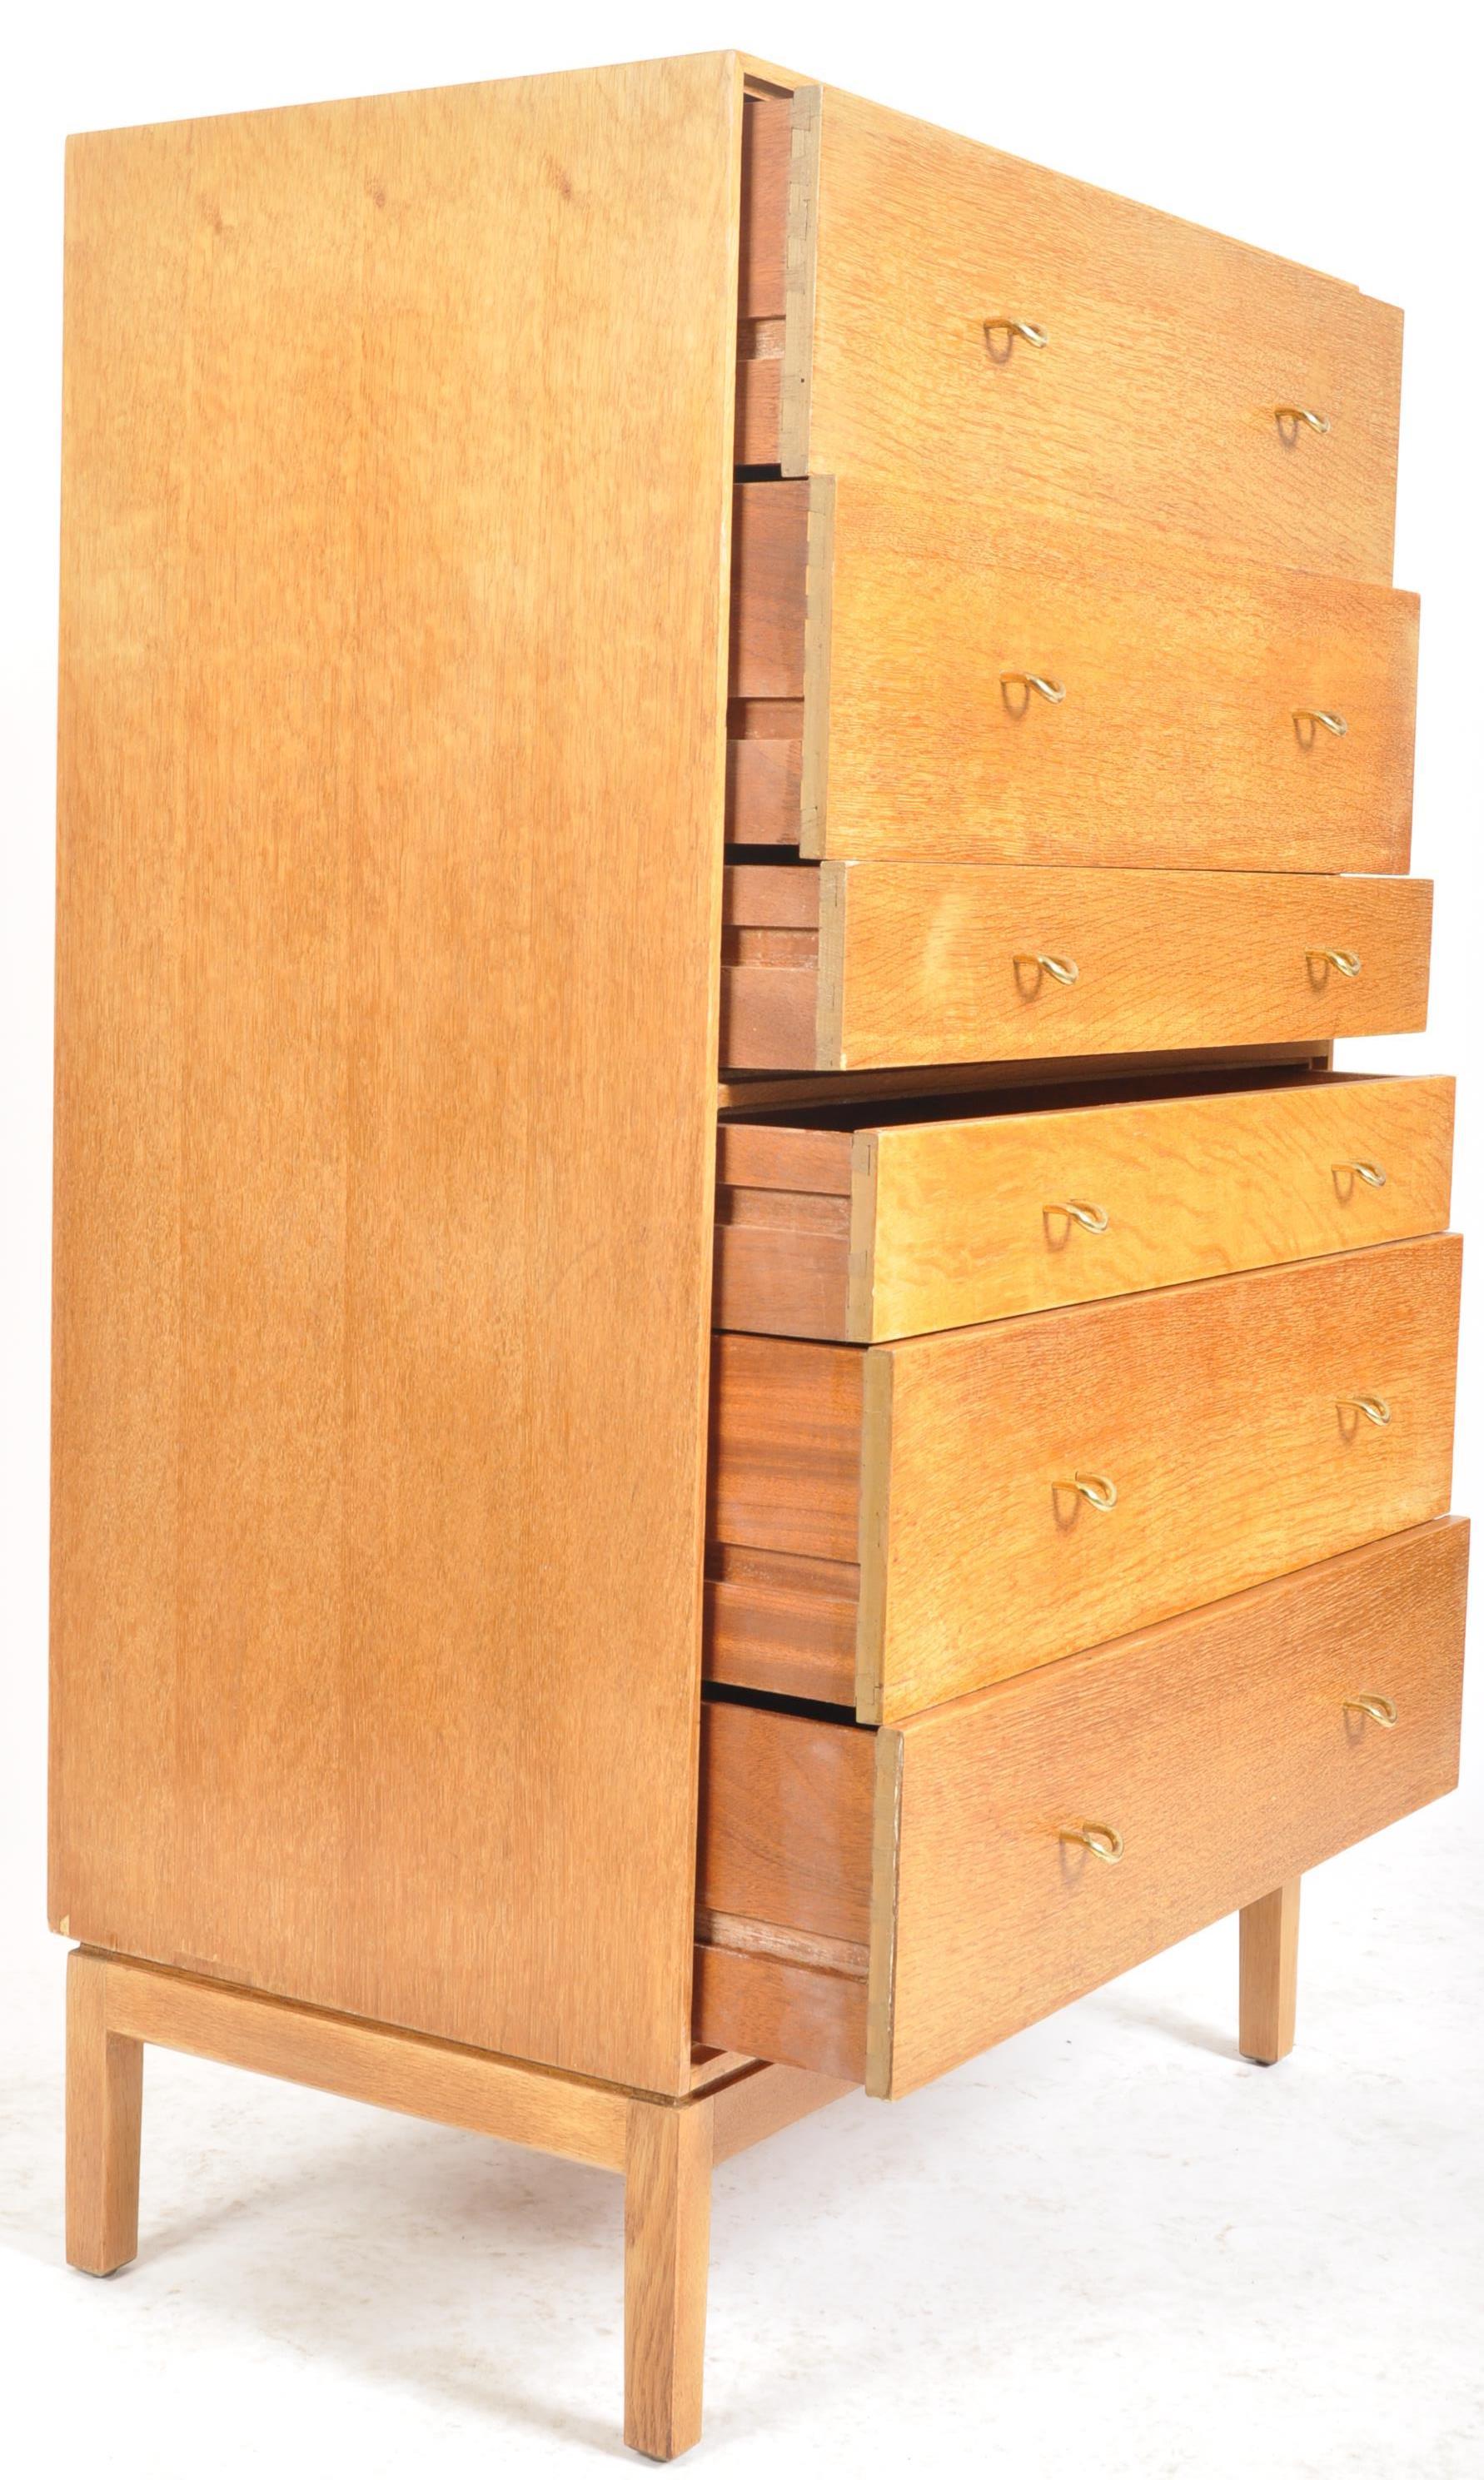 JOHN & SYLVIA REID FOR STAG - MID CENTURY OAK CHEST OF DRAWERS - Image 4 of 6